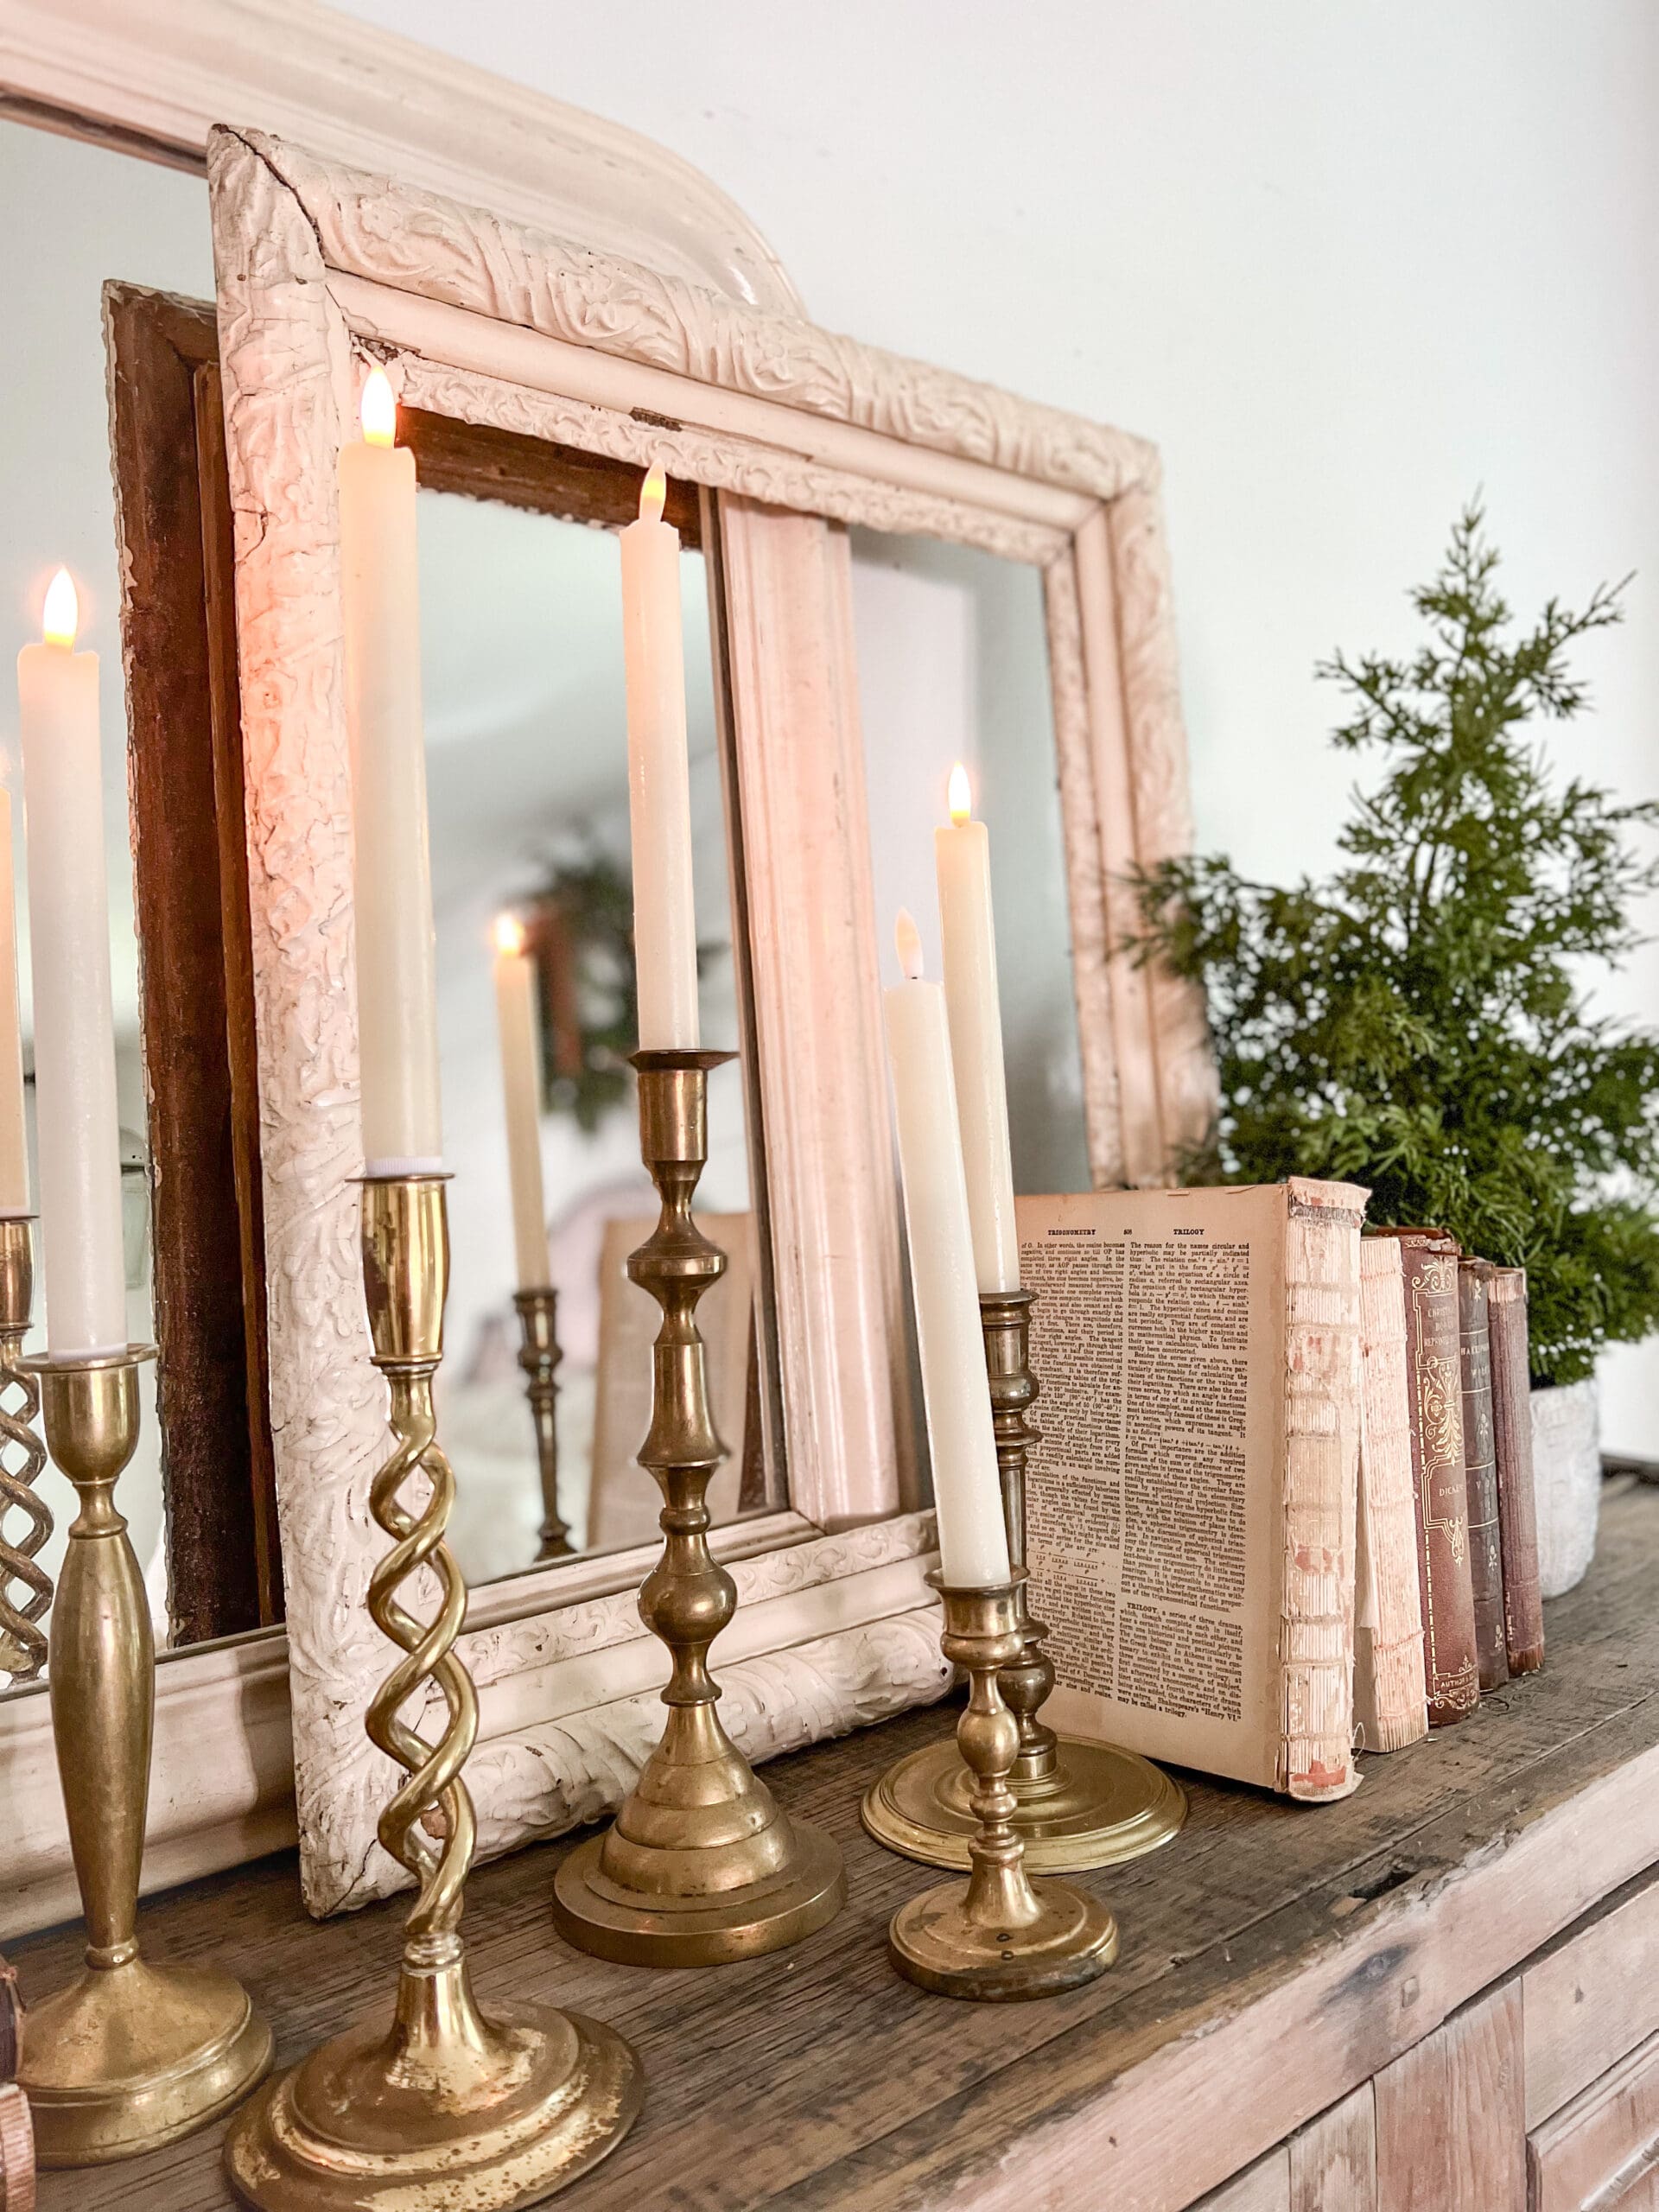 cabinet styled with brass candlesticks holding flameless candles